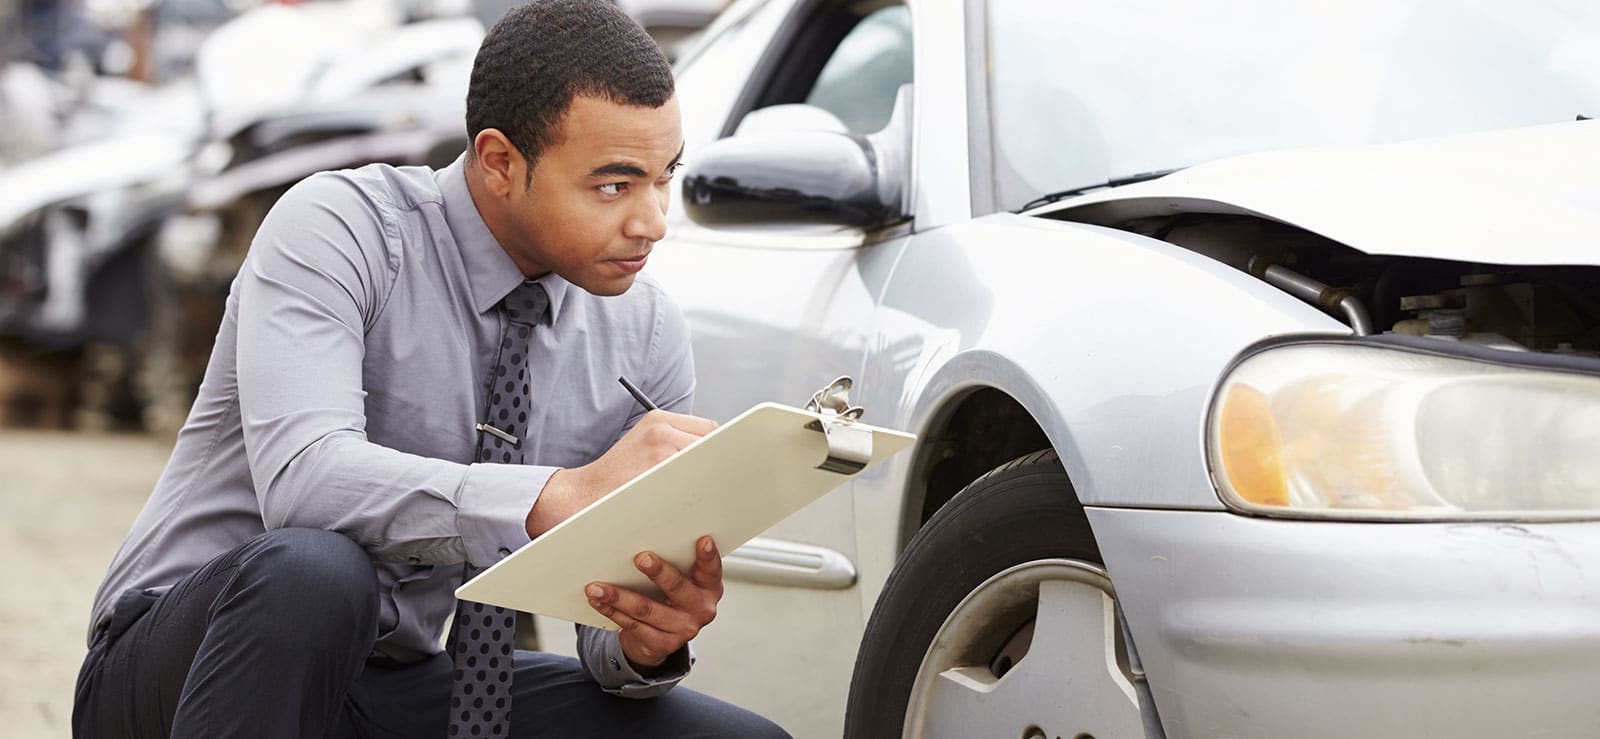 Things to Consider When Reviewing Your Auto Insurance Policy